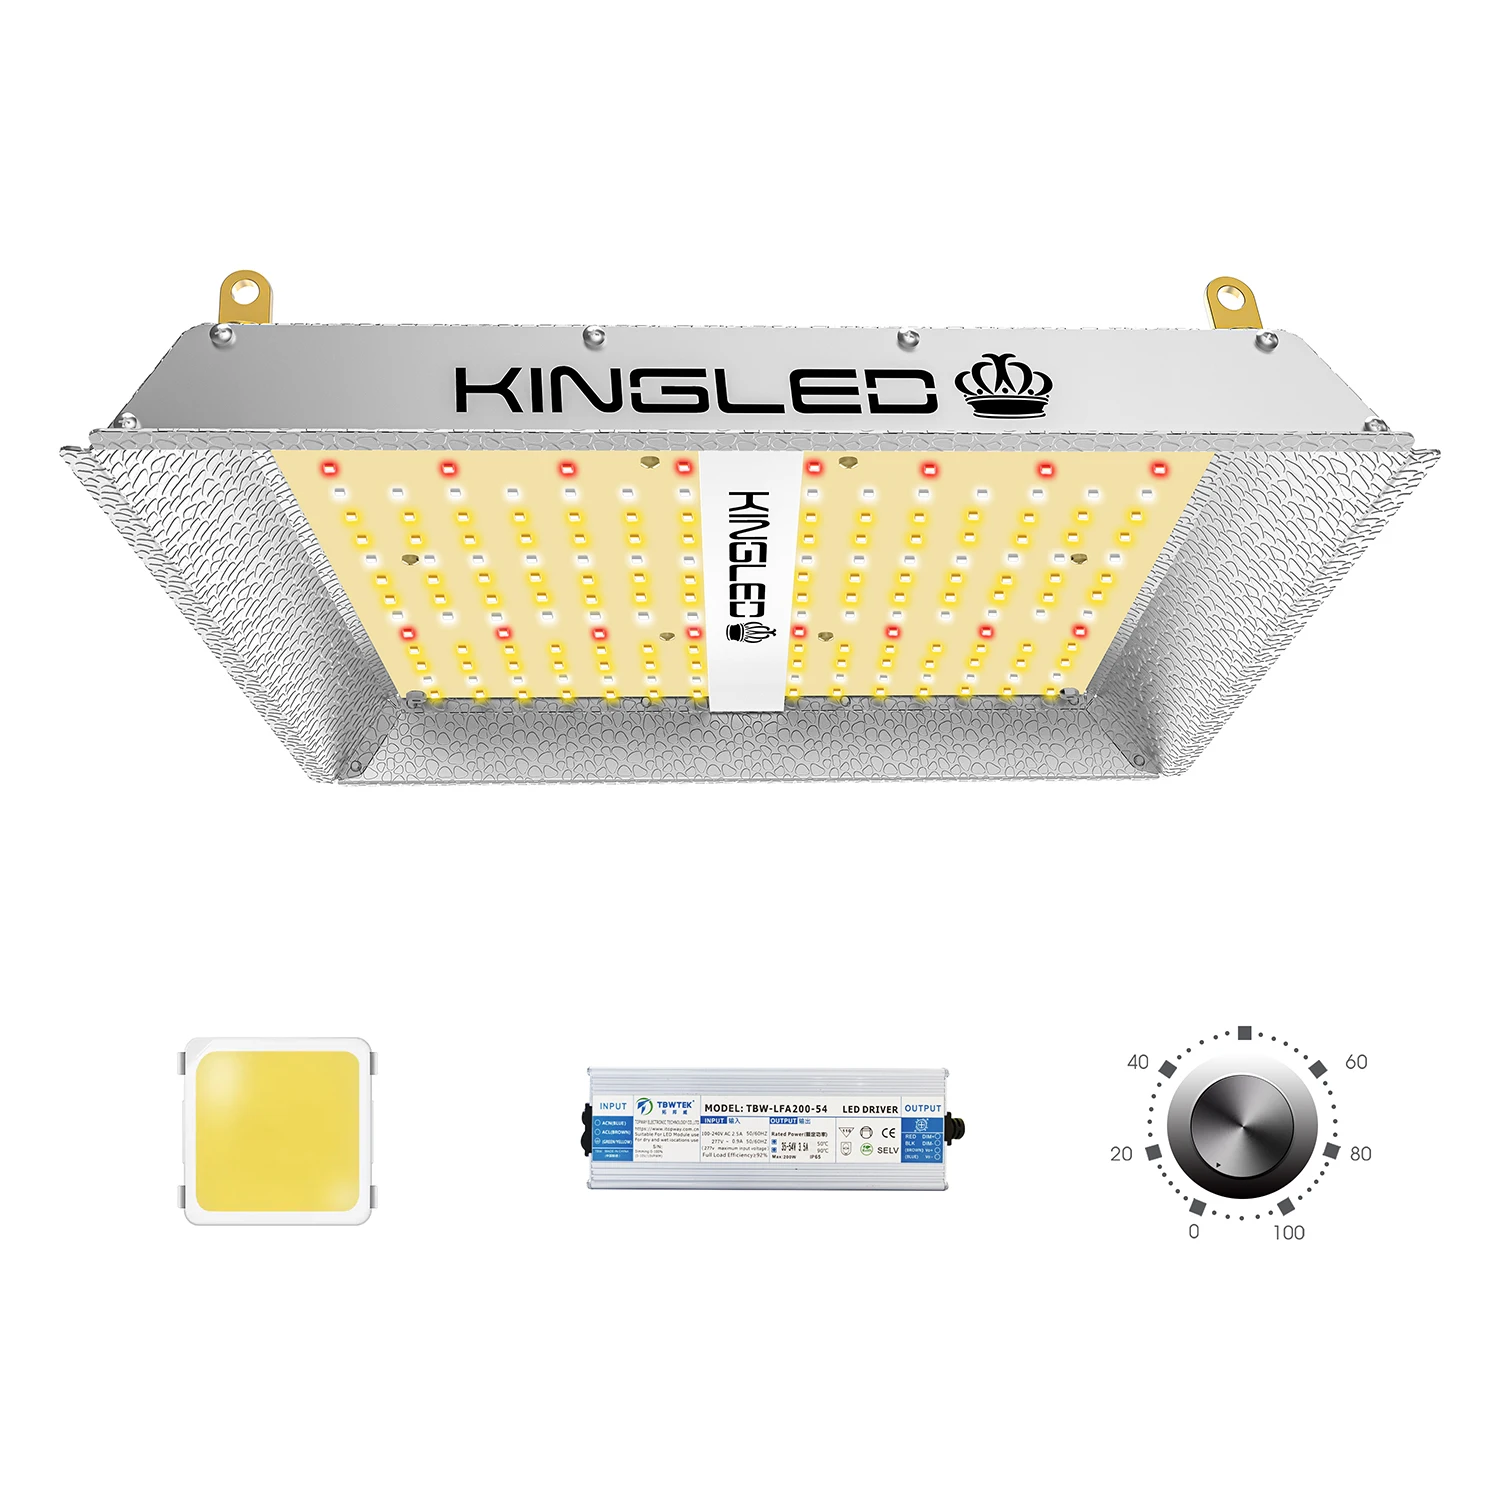 KINGBO 600W Doppel Chips LED Grow Light Vollem Spektrum LED Pflanzenlampe mit Rope Hanger for Indoor Greenhouse Hydroponic Plants Veg and Flower 